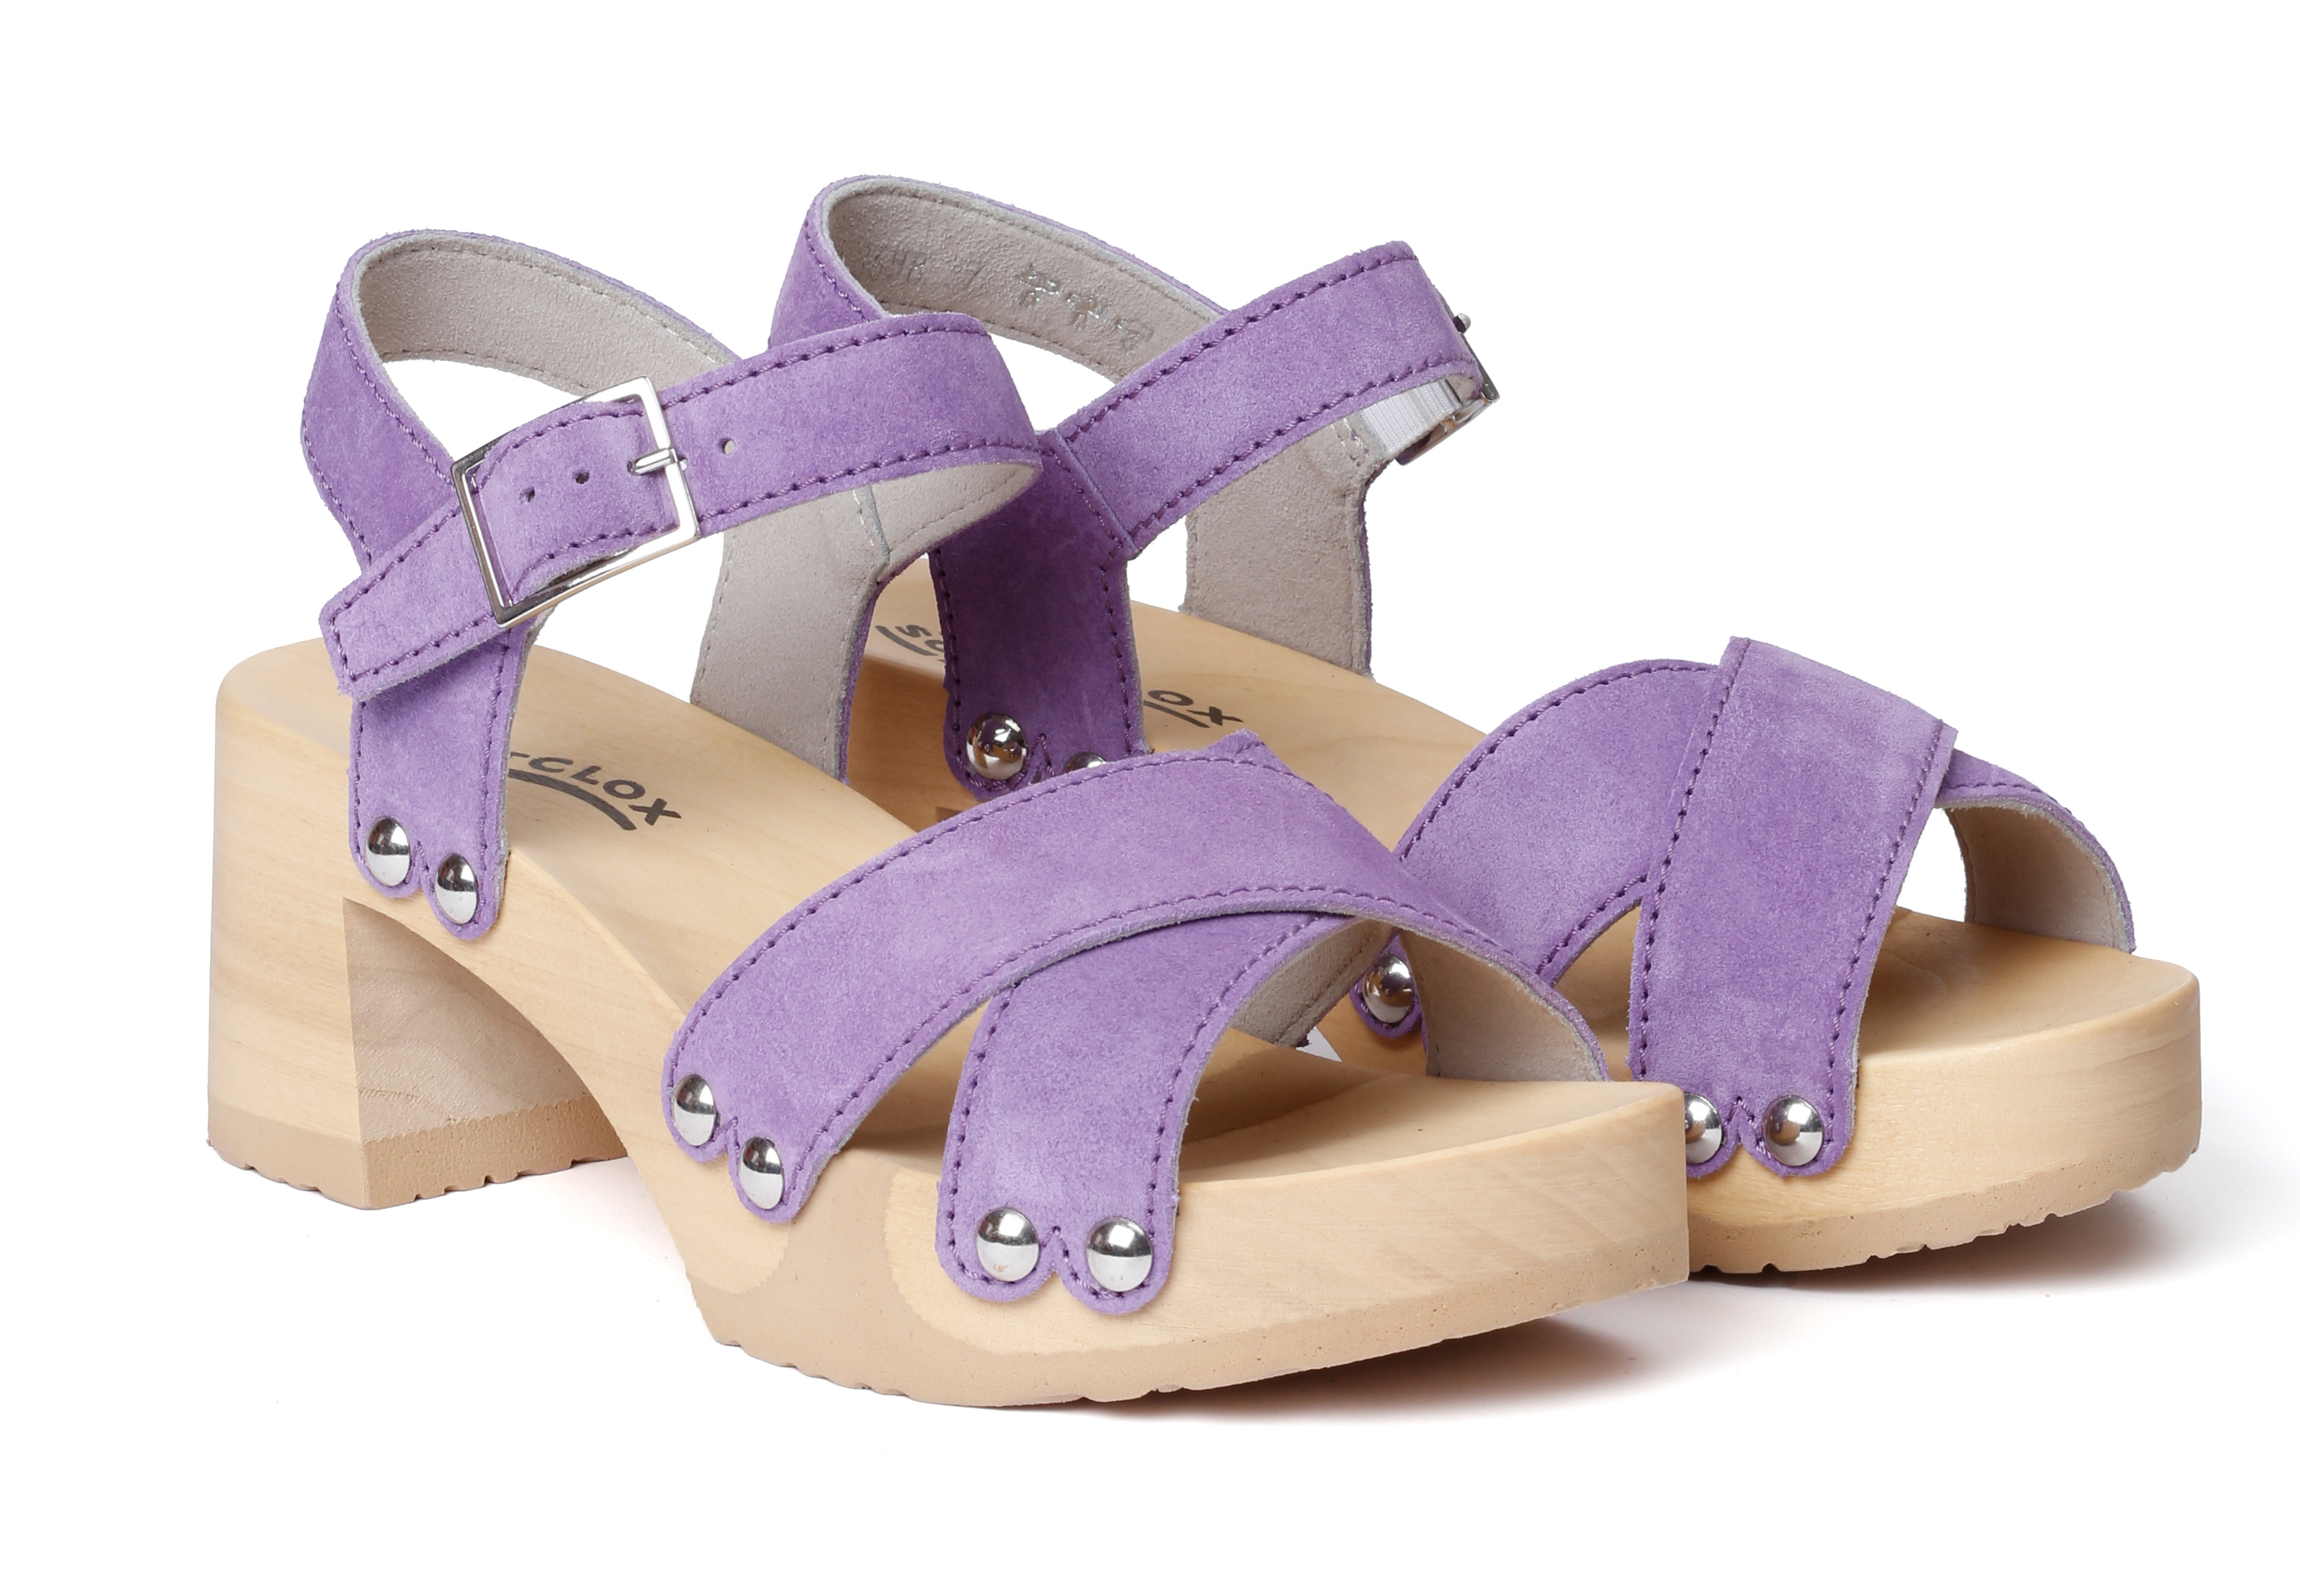 Sandals from poplar wood smooth suede in color violet by Softclox